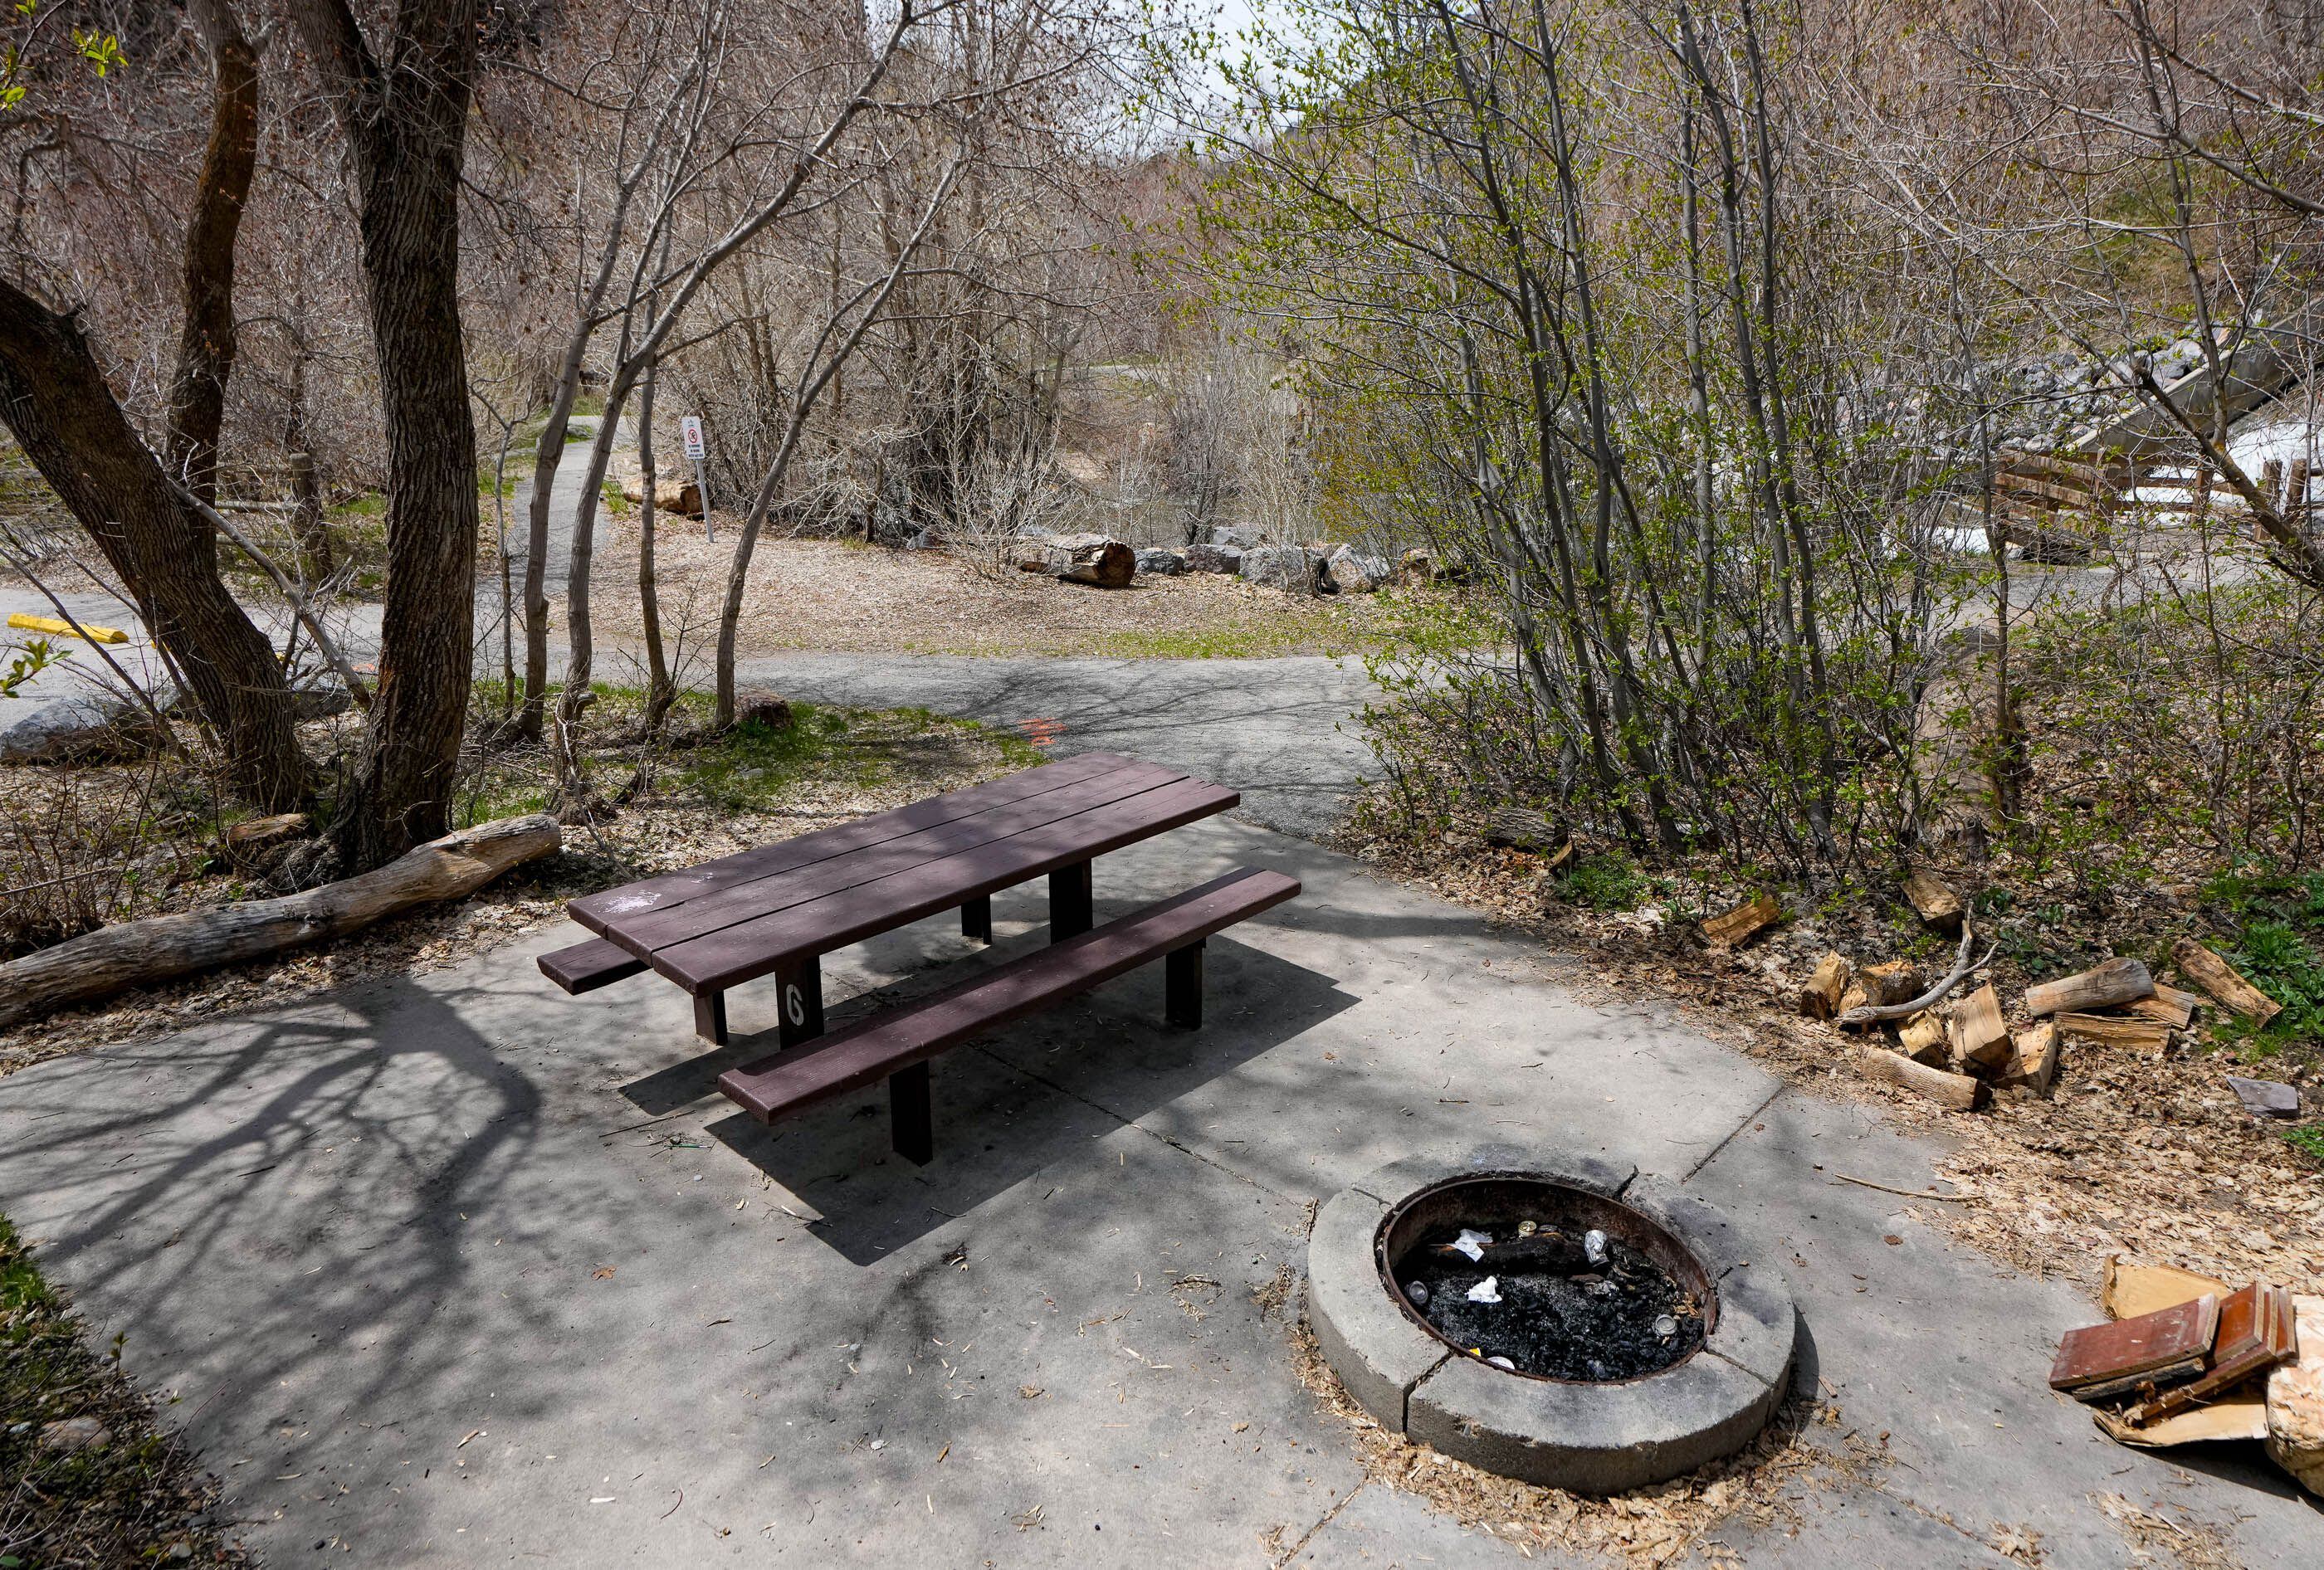 (Francisco Kjolseth  |  The Salt Lake Tribune) Site number 6 is next to Big Cottonwood Creek at Storm Mountain Picnic Area. Kamal Bewar, his children and friends had reserved the site last September but were asked to leave by camp hosts who accused them of leaving a fire burning and then called police. An officer ended up taking Bewar to the ground and detained him until backup arrived, which Bewar contends was an excessive use of force that traumatized the group. 